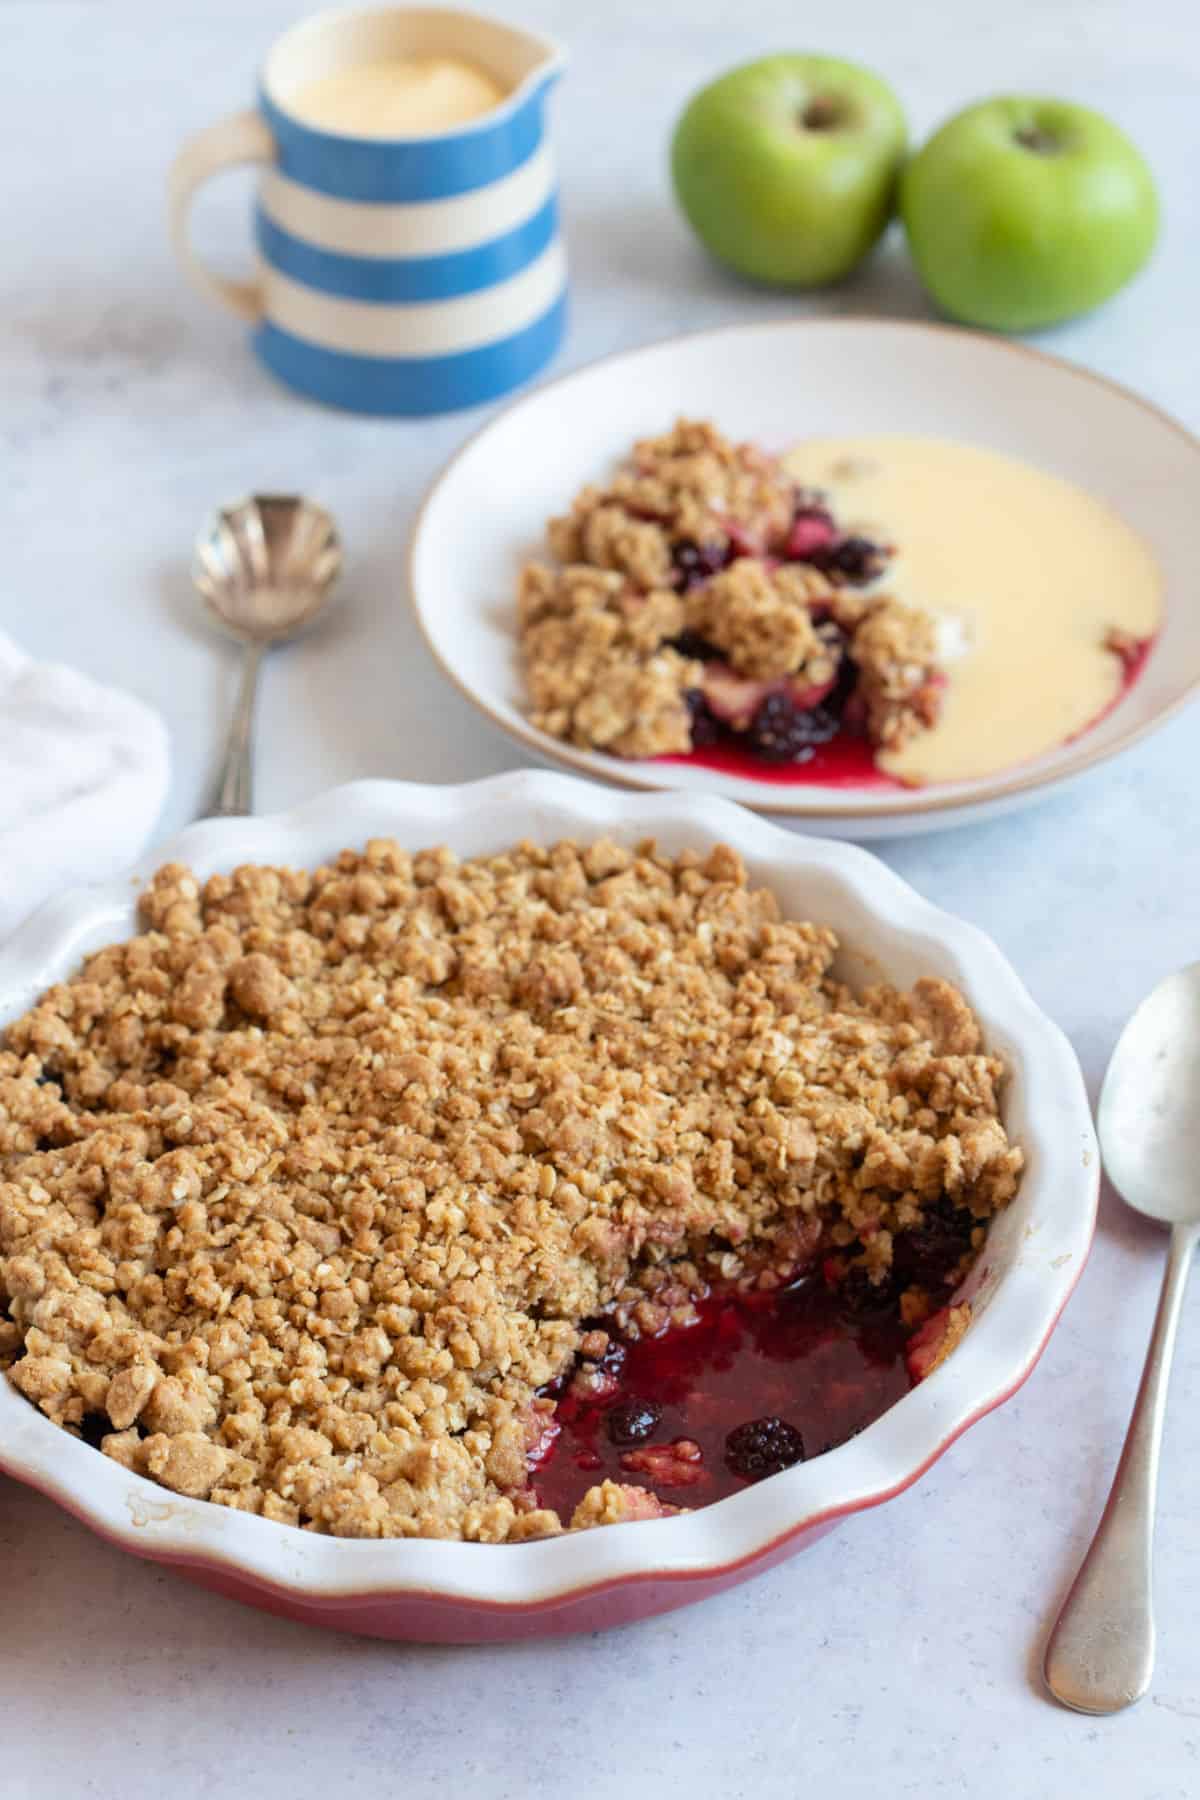 Blackberry and apple crumble in a red pie dish with a jug of custard.